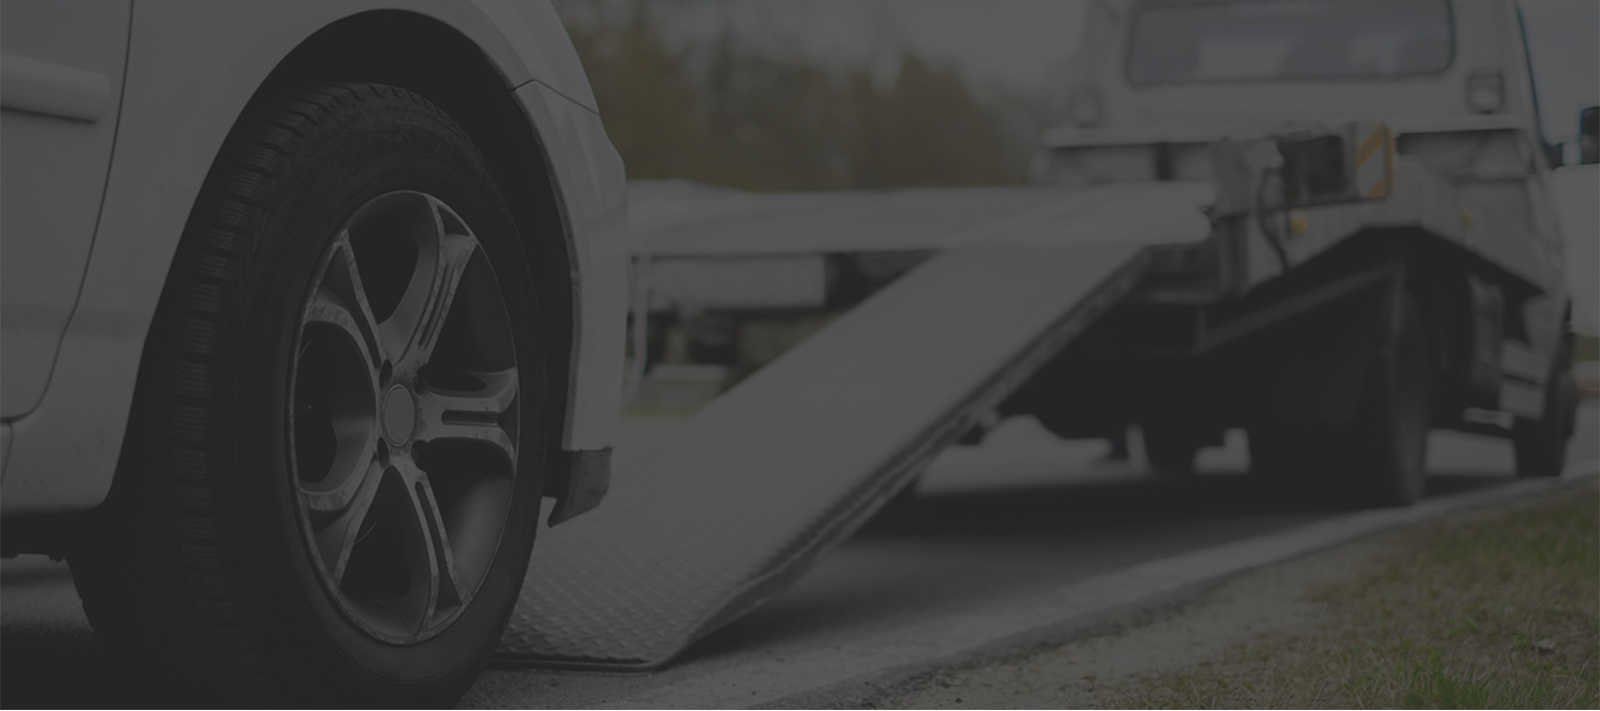 Most Affordable Towing Services in Calgary - Low Buck Towing